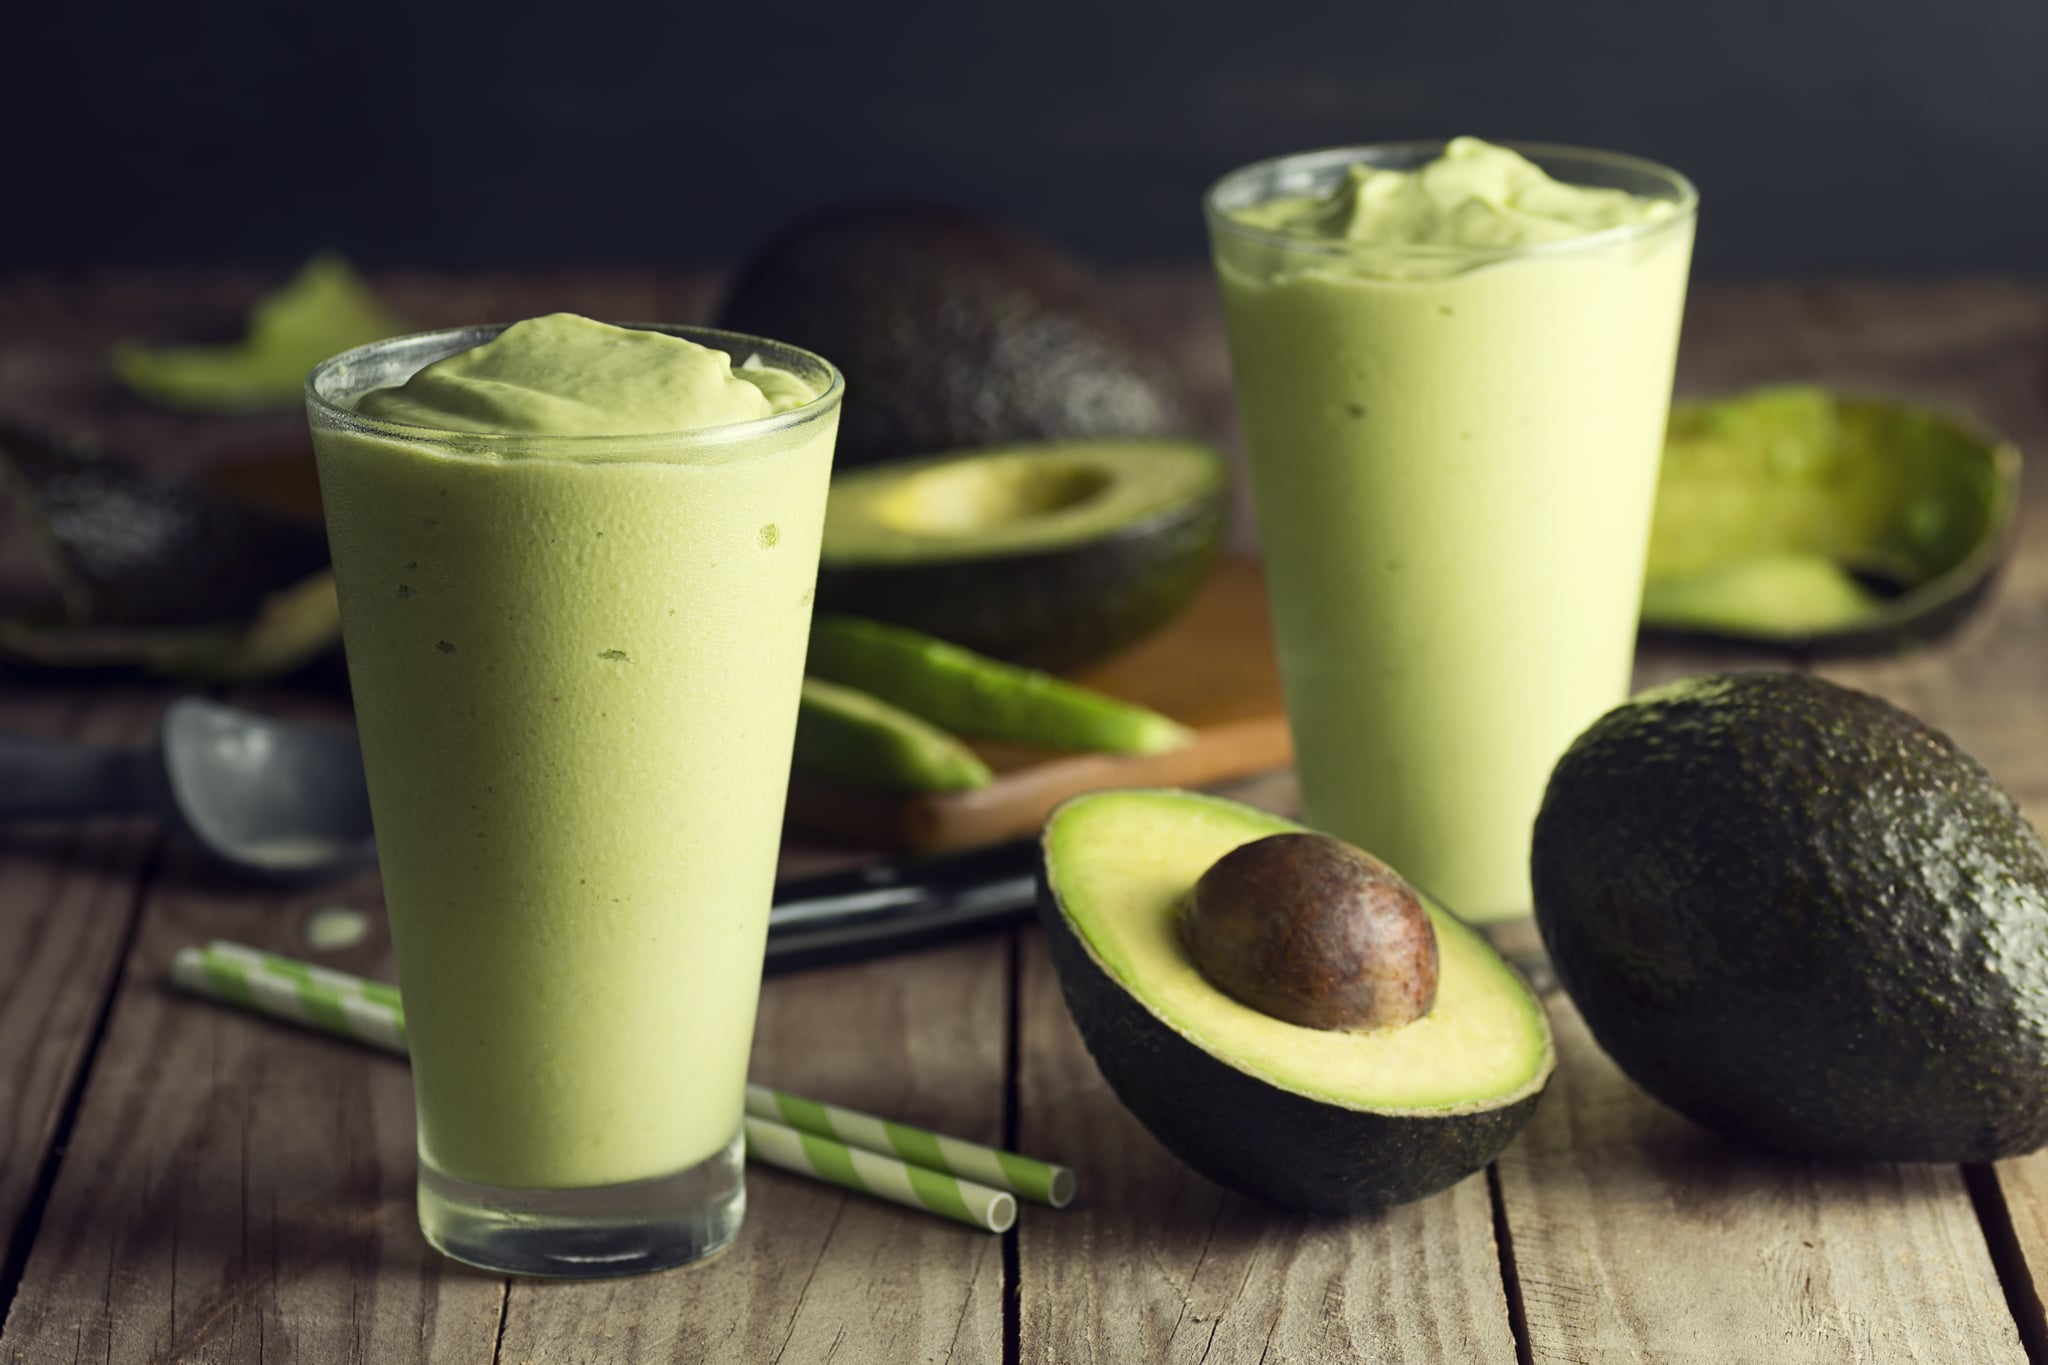 How Do You Extract Avocado Juice Typical Of Asmat?